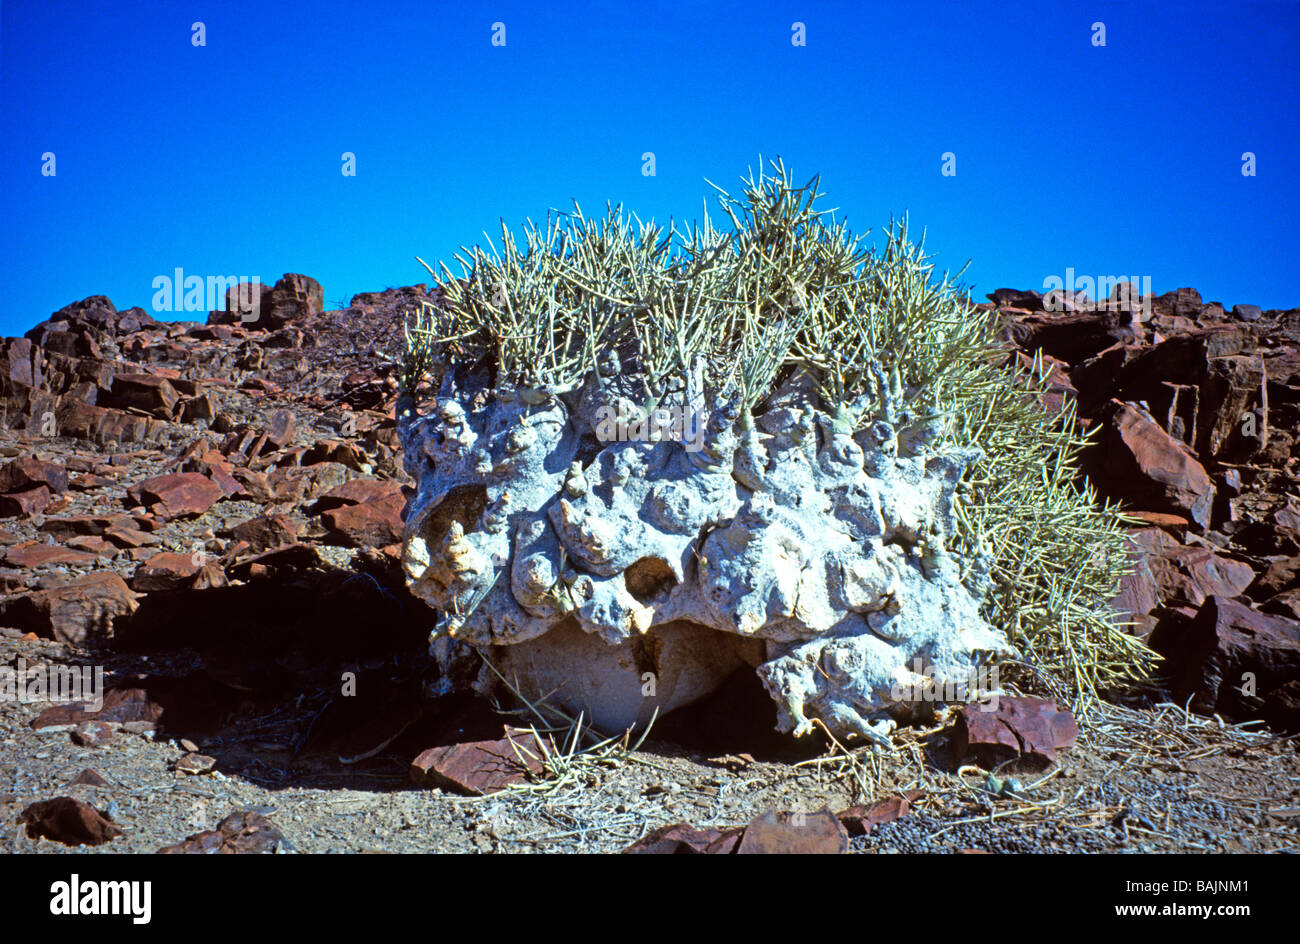 'Elephant's foot' plant,  growing in the driest of environments in the Namib Desert Namibia Stock Photo